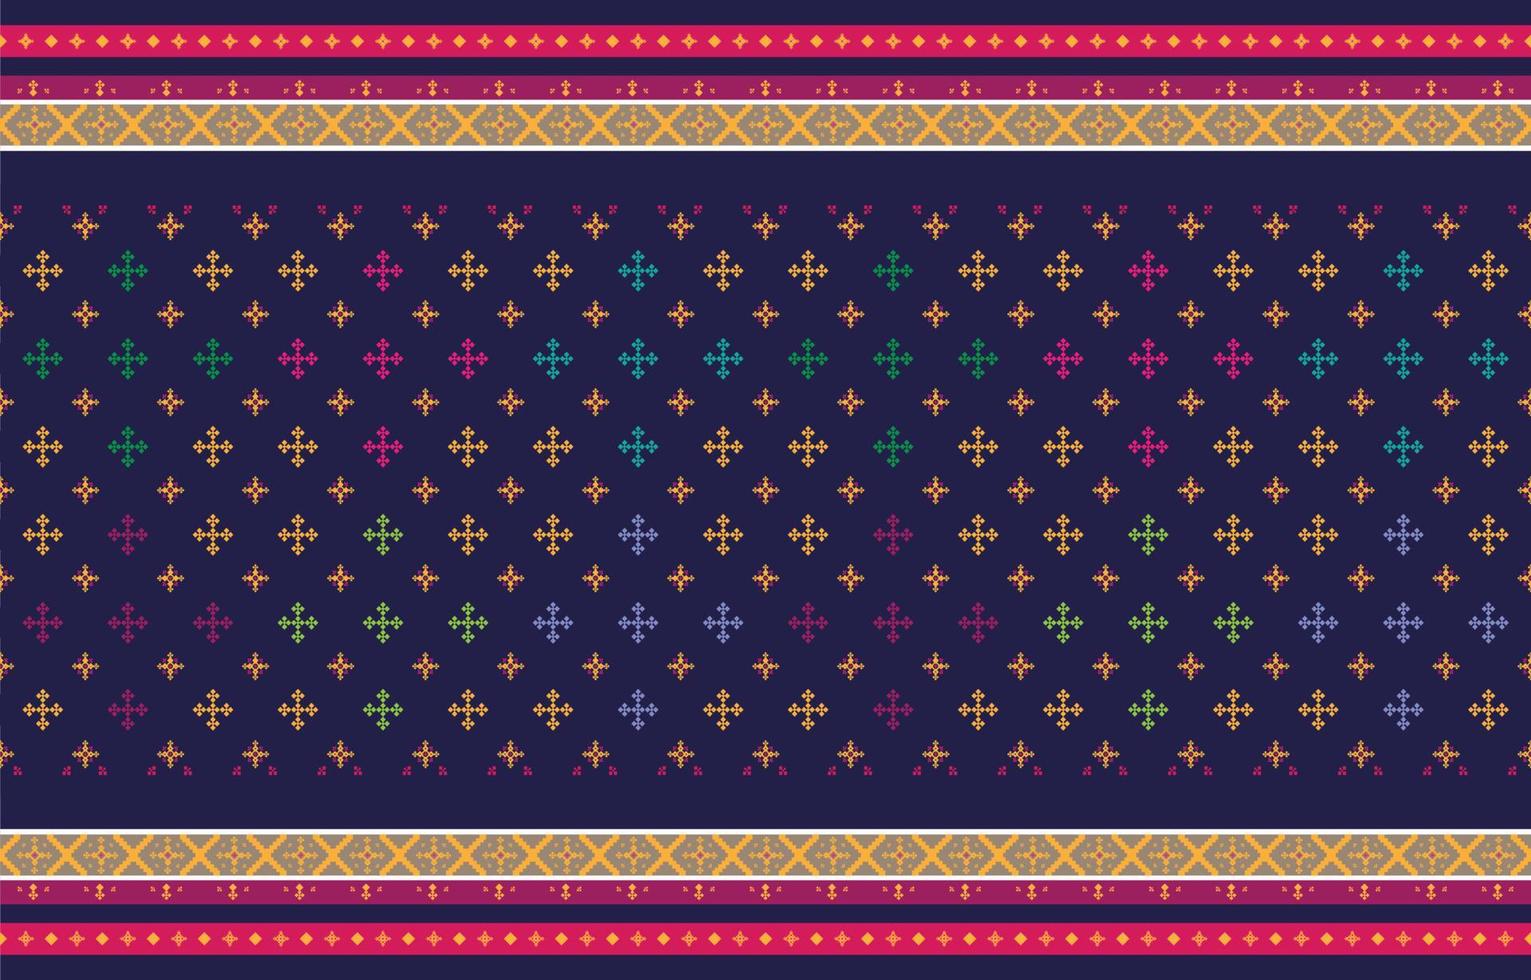 Abstract geometric and tribal patterns, usage design local fabric patterns, and Design inspired by indigenous tribes. geometric Vector illustration